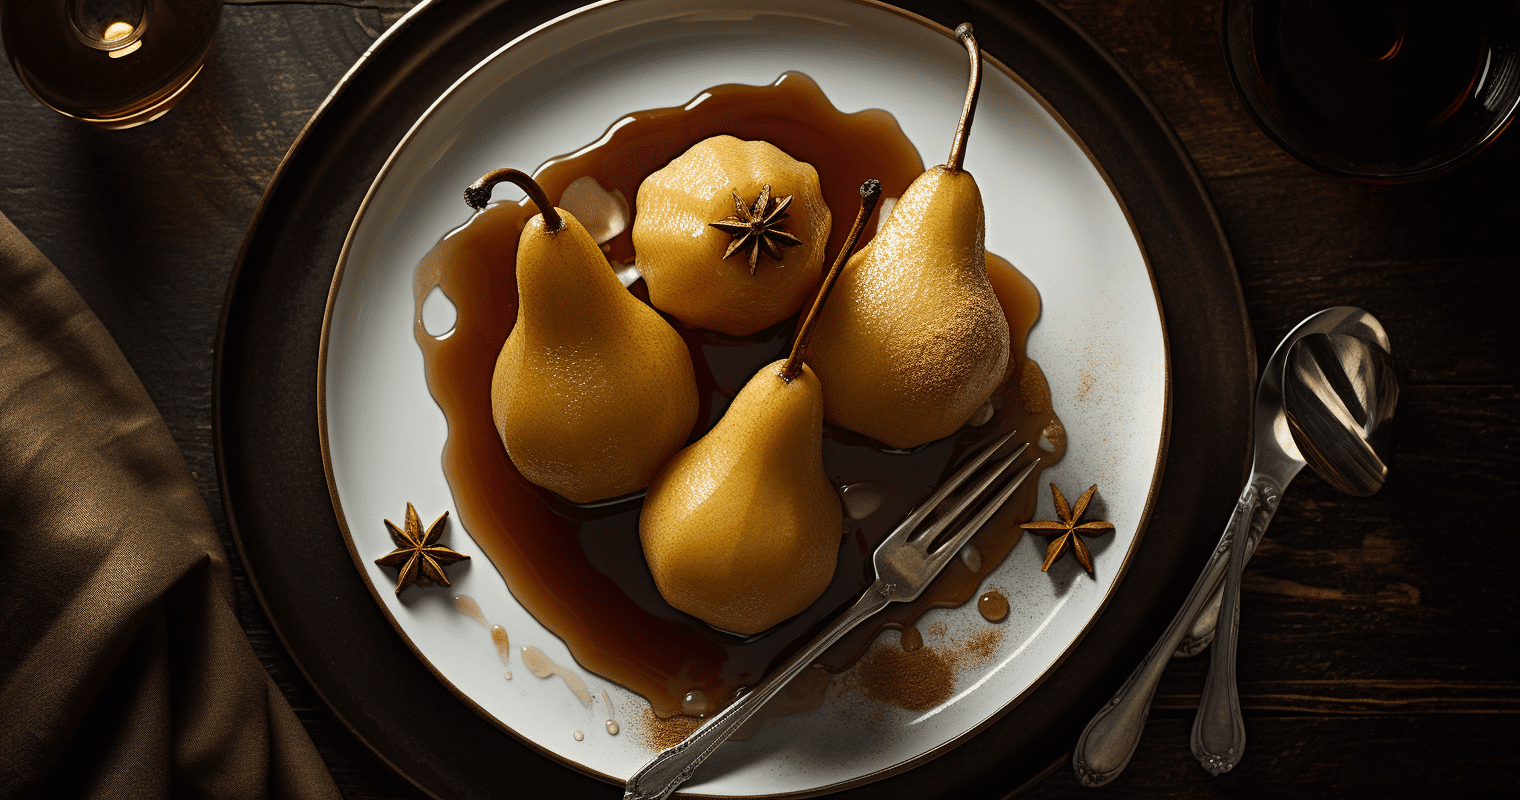 Upside-Down Pear Gingerbread Cooking Instructions